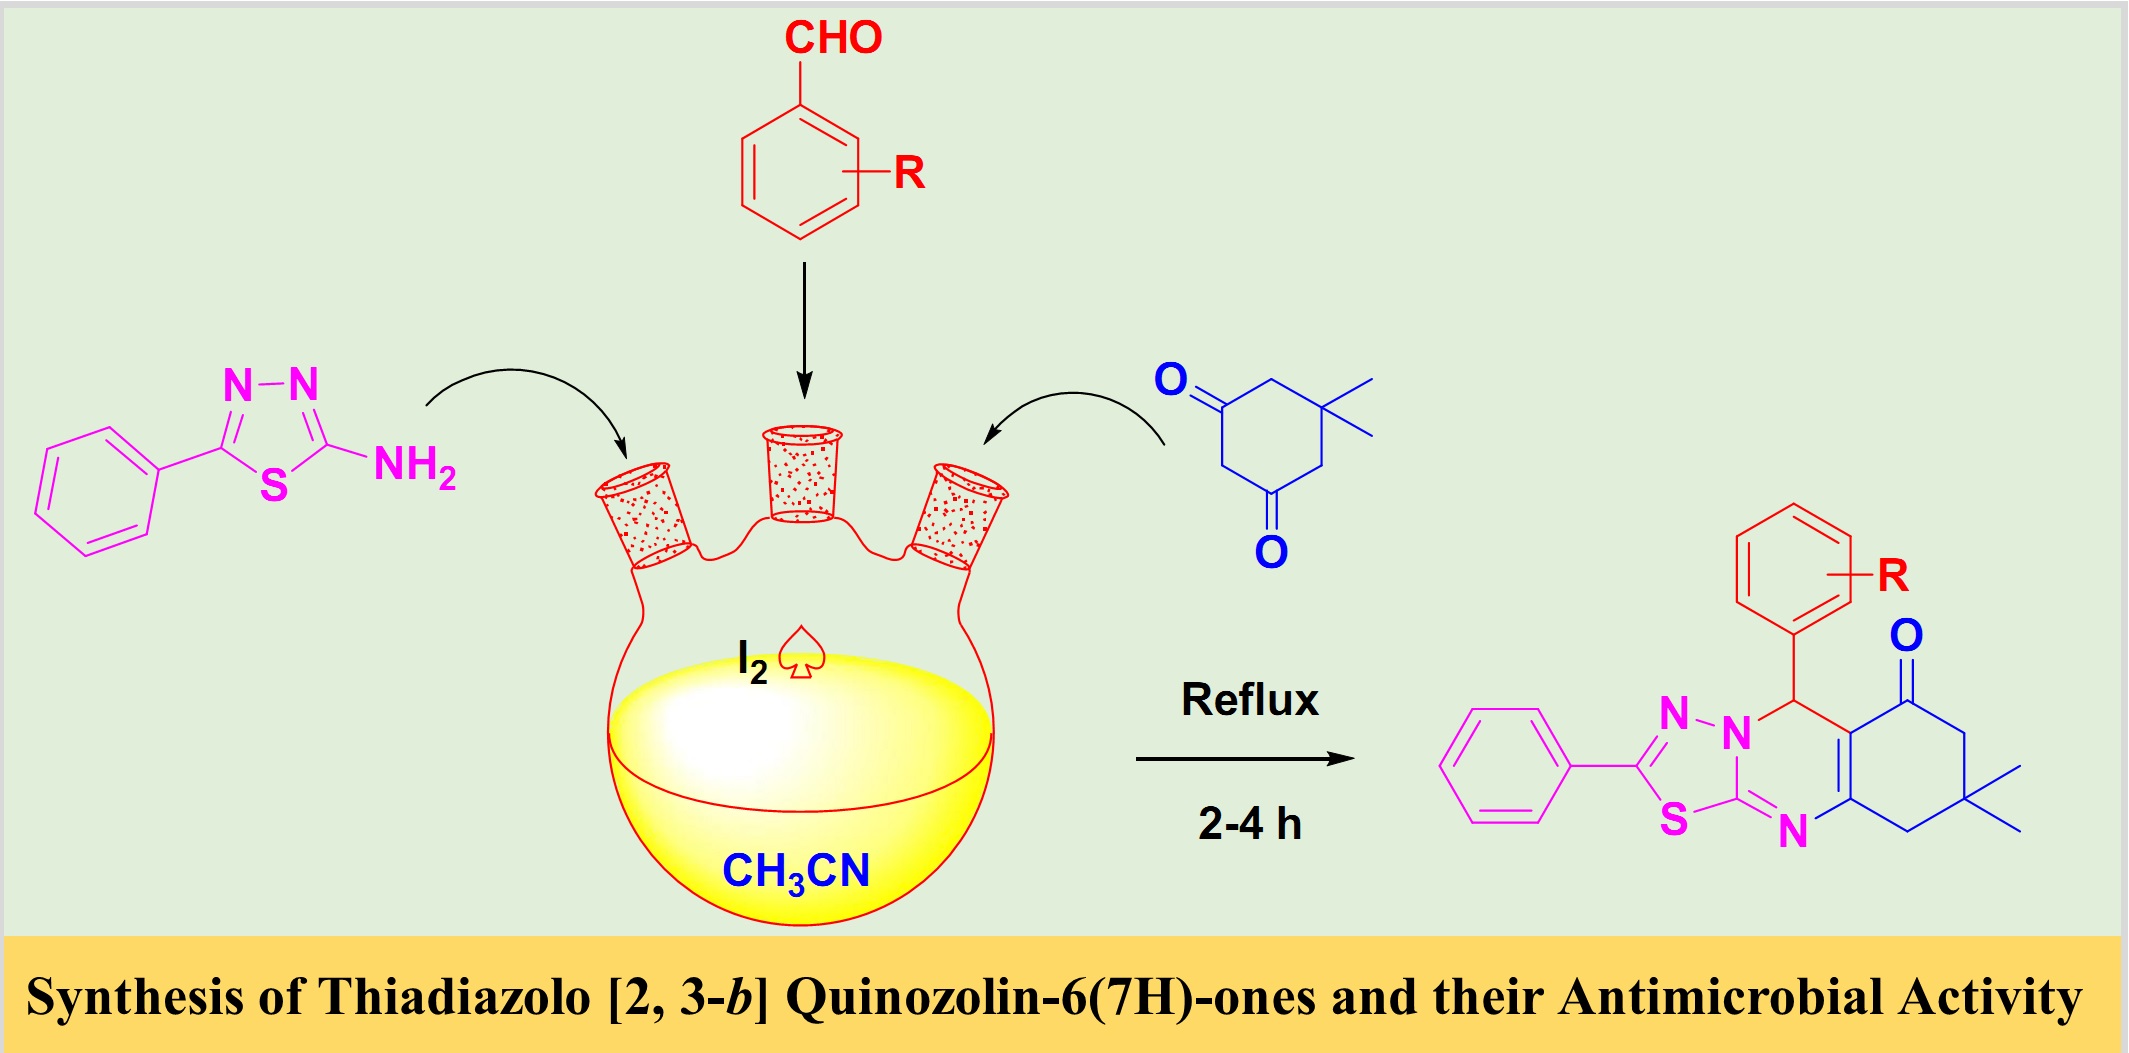 Molecular Iodine Mediated One-Pot Three-Component Reaction for Synthesis of Thiadiazolo [2, 3-b] Quinozolin-6(7H)-ones and their Antimicrobial Activity 